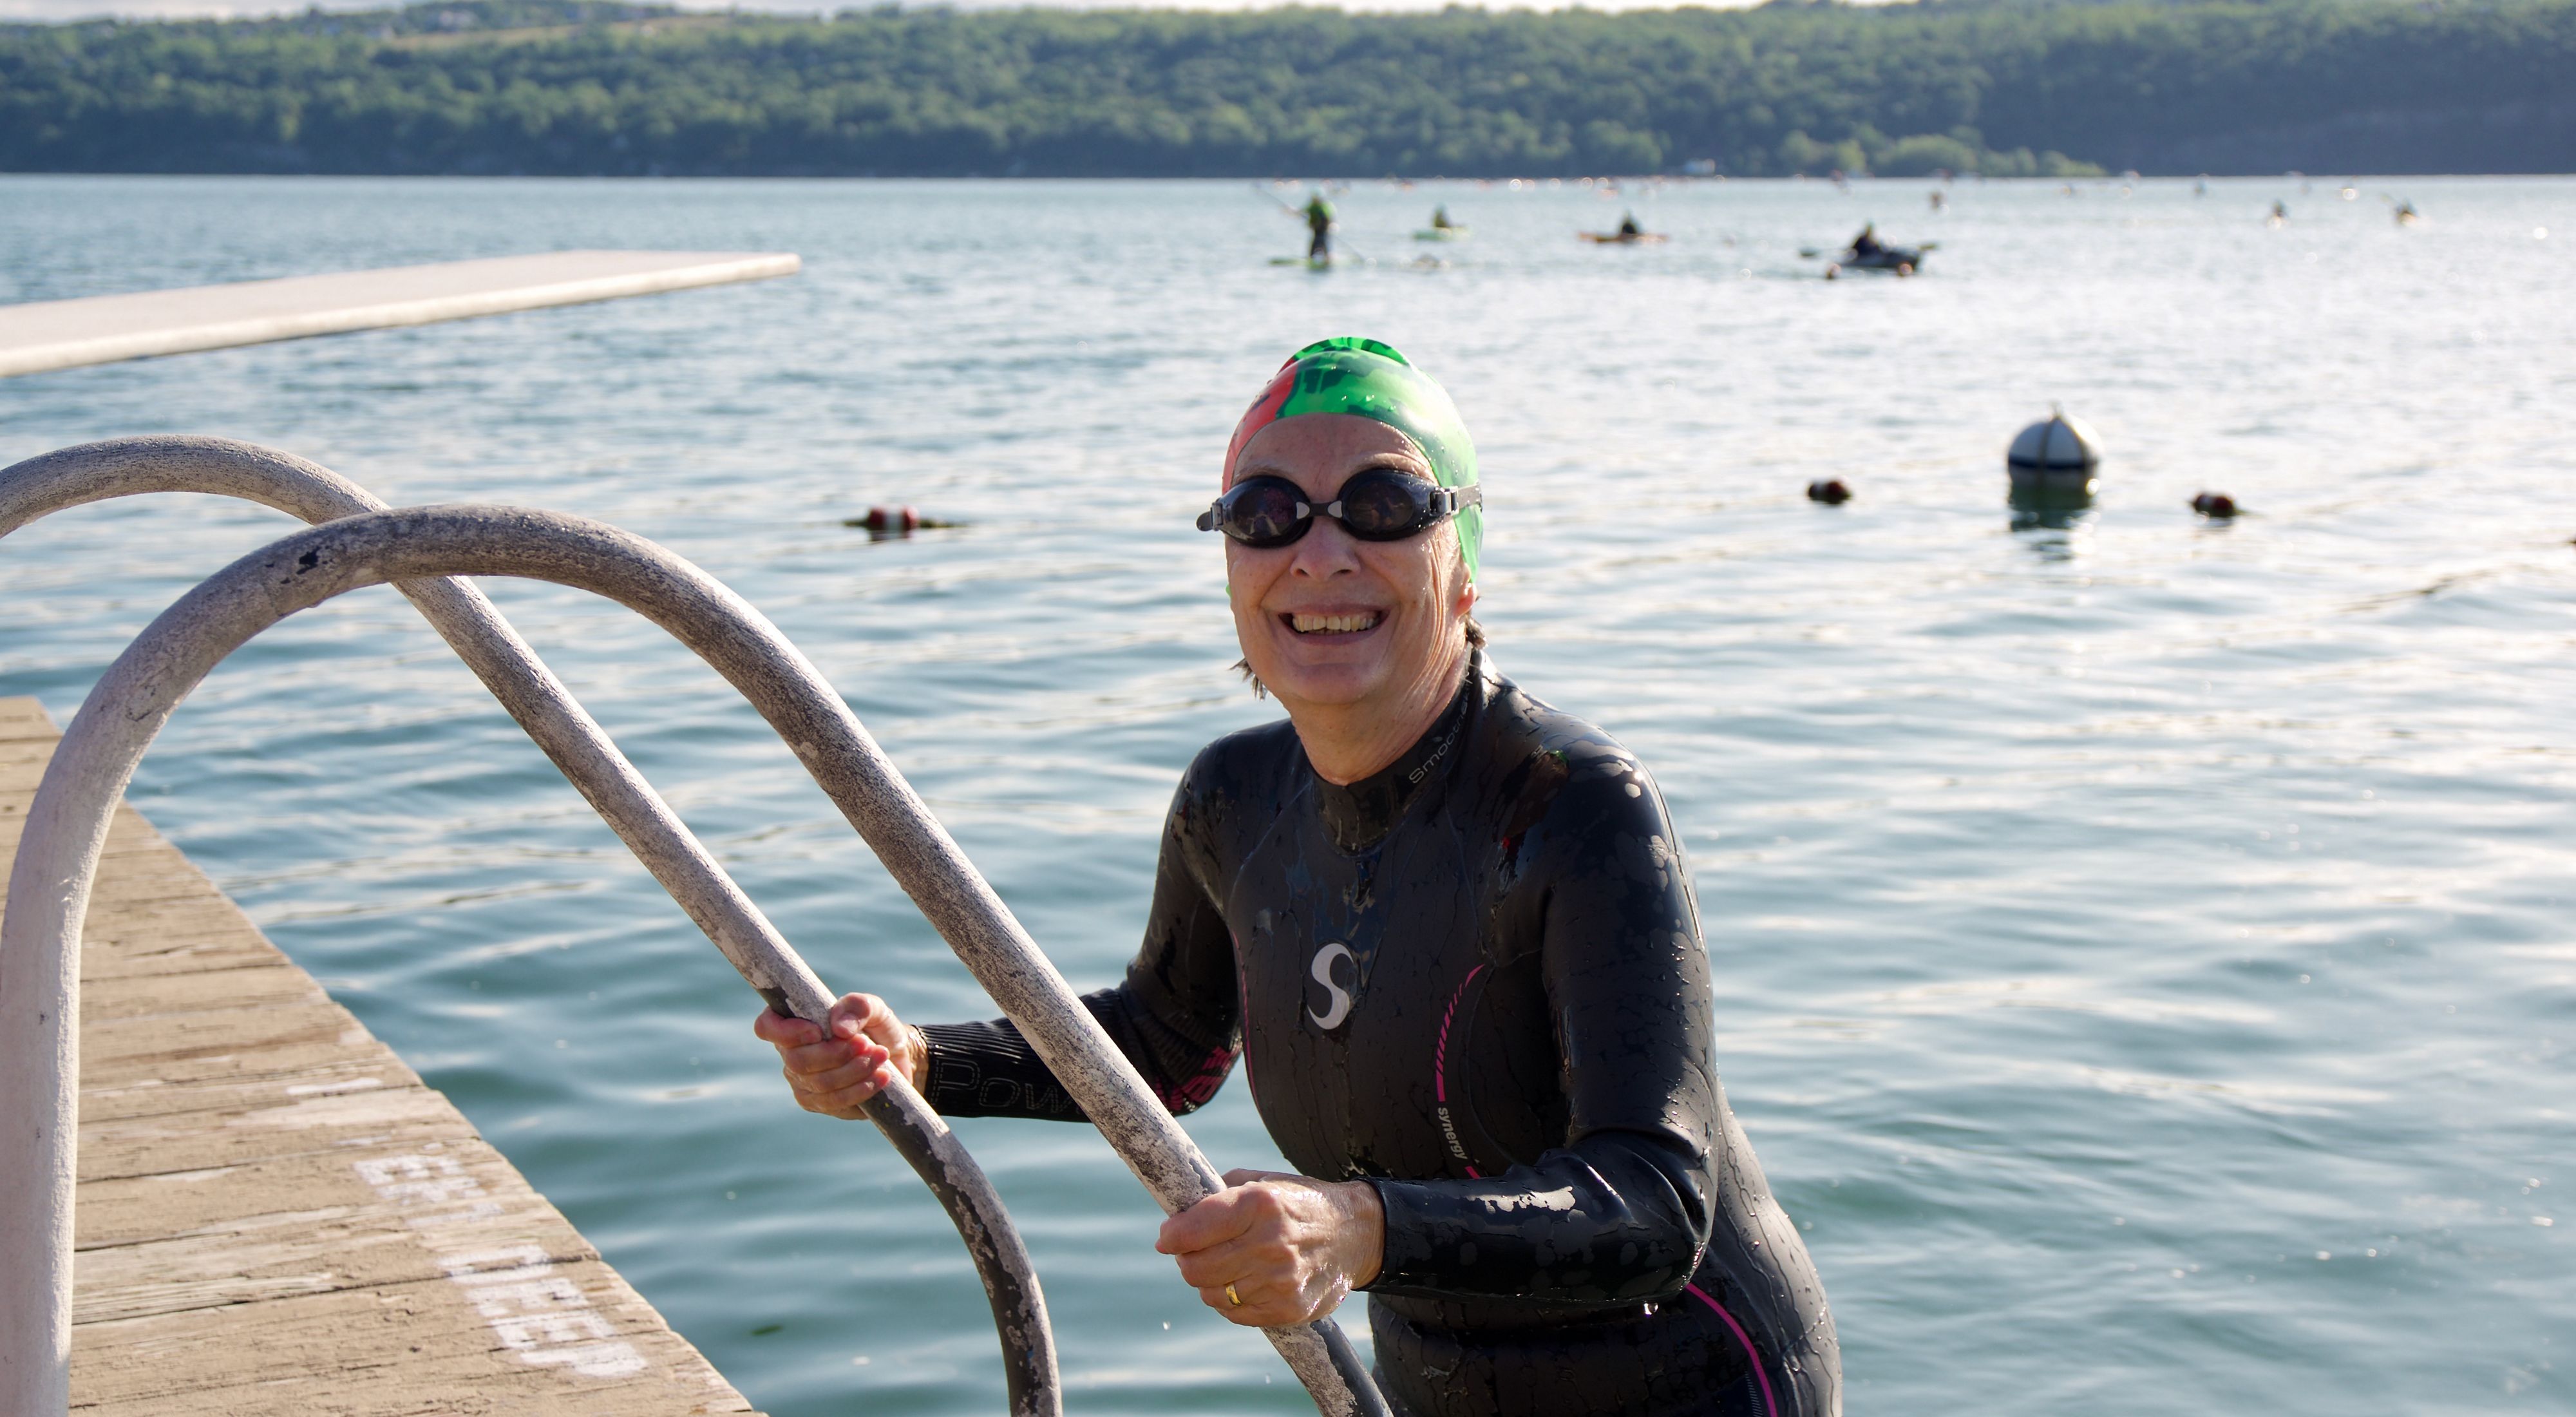 A swimmer in a long sleeved black wetsuit and green swim cap with goggles on emerging from a lake on a ladder and dock at the lefthand side of the frame.